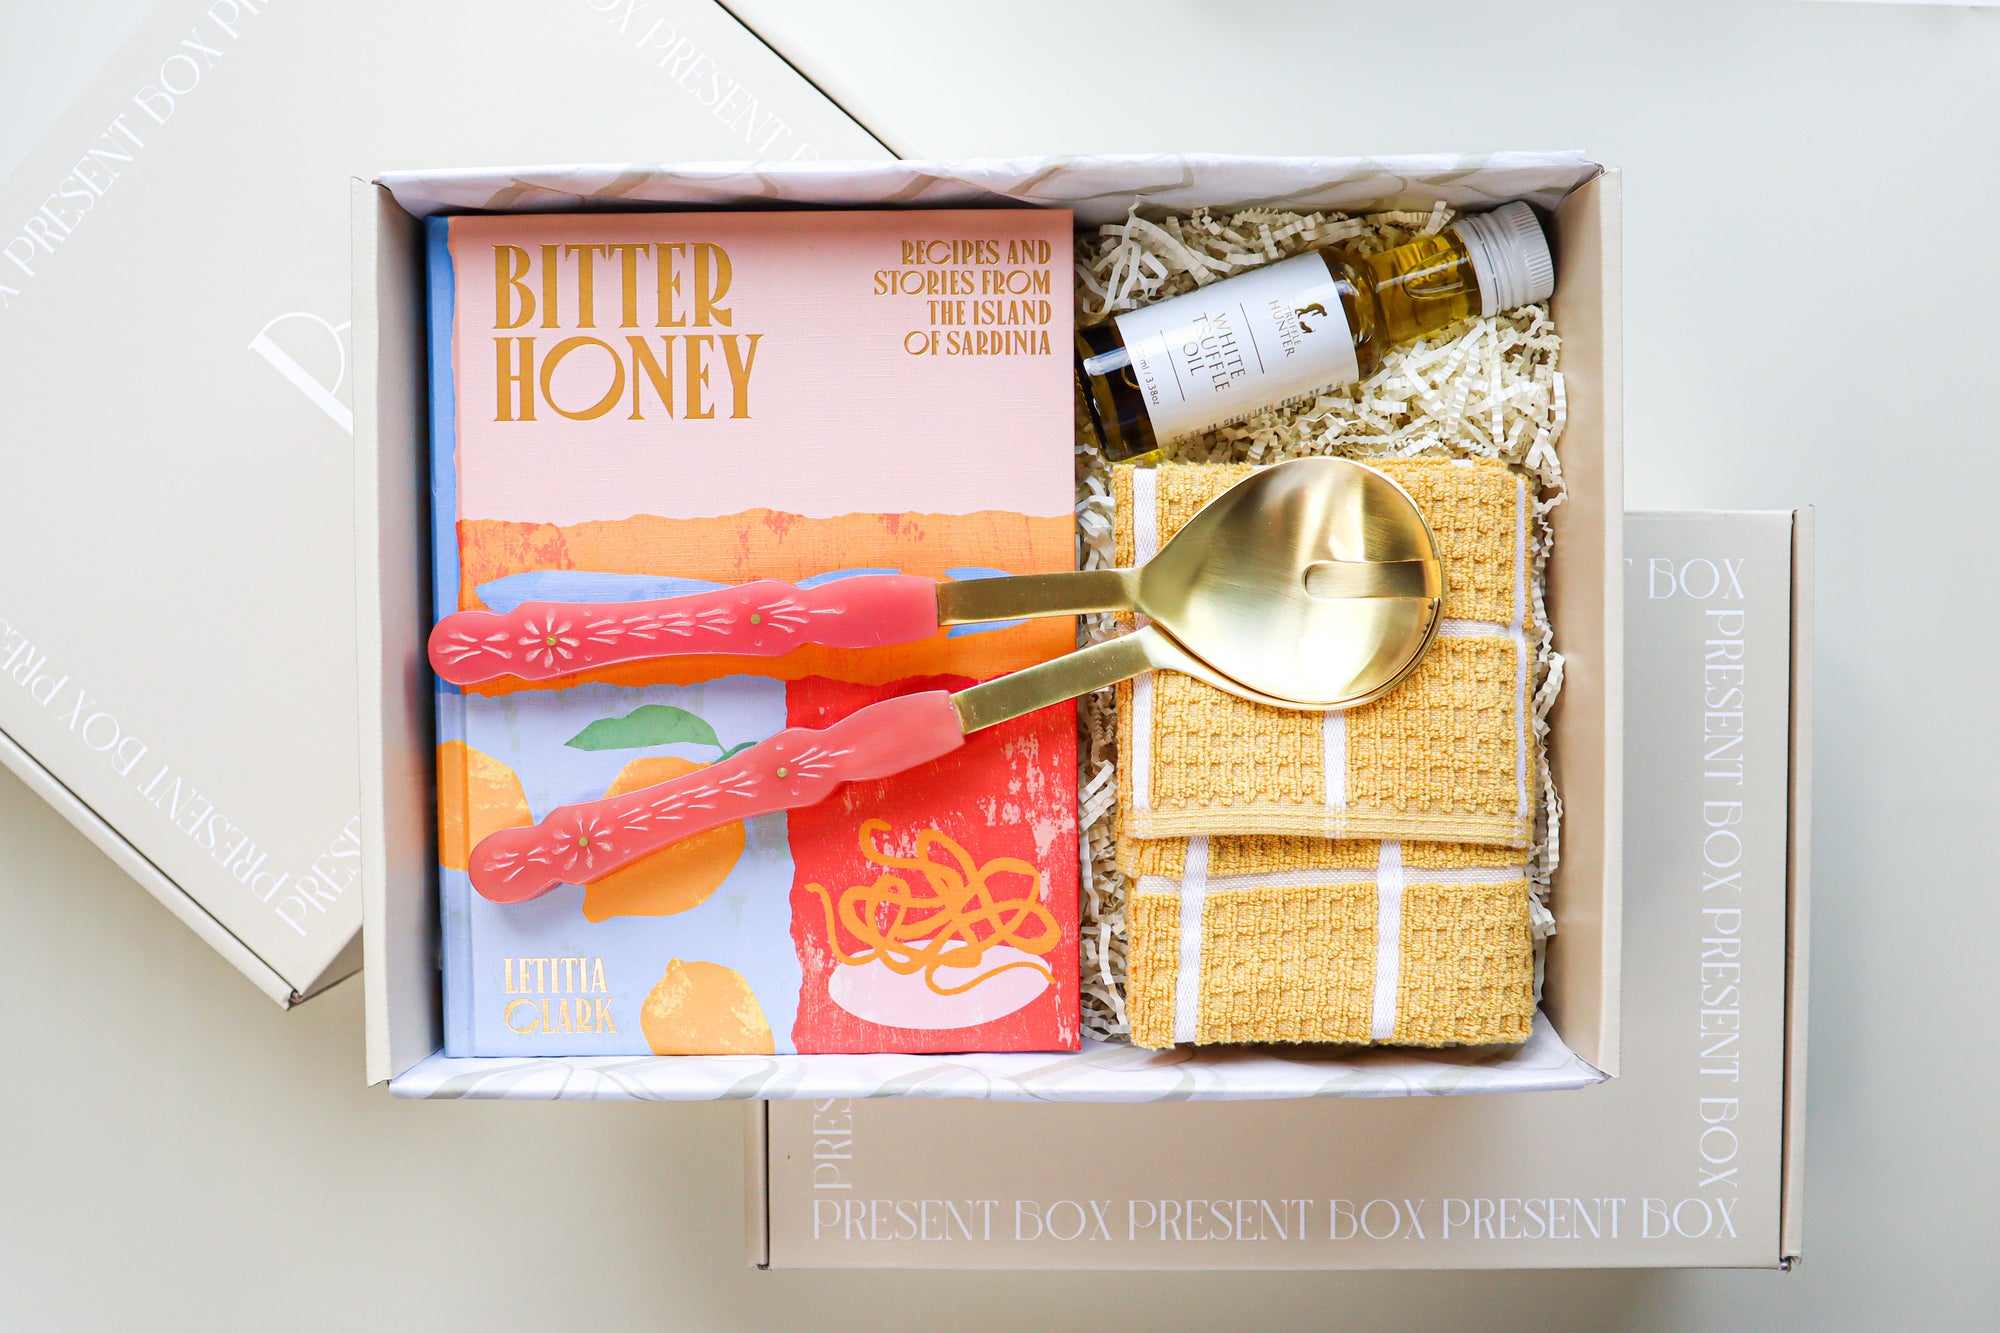 A beige coloured gift box containing a bright hard cover cook book titled Bitter Honey, Gold and Pink Salad Servers, a small bottle of White Truffle Oil and a yellow and white striped tea towel